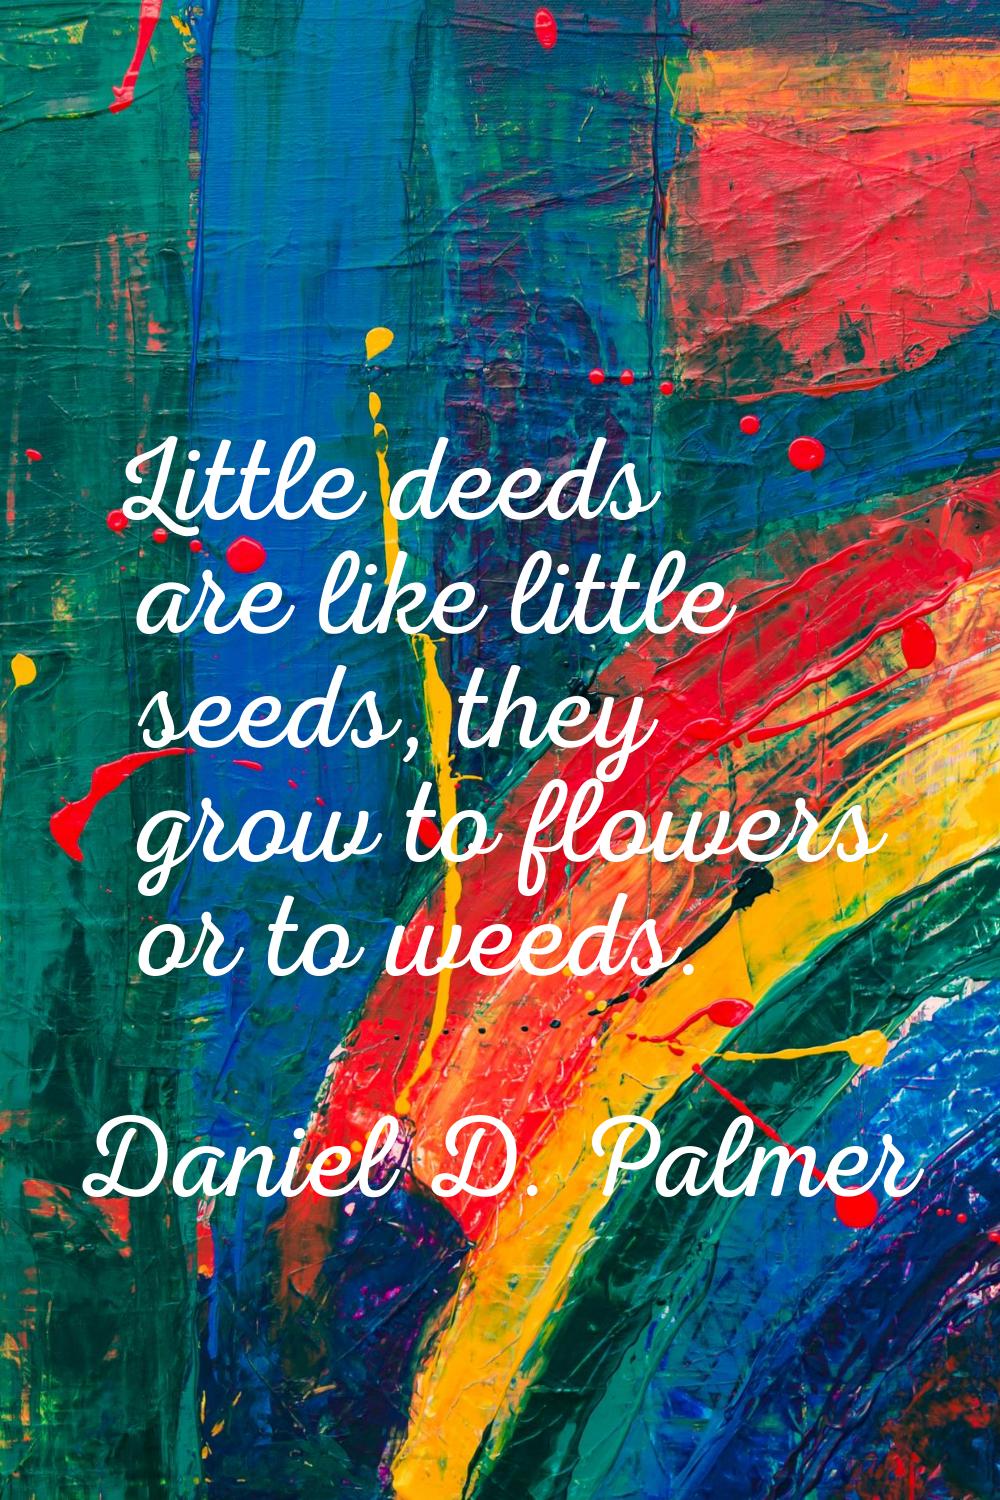 Little deeds are like little seeds, they grow to flowers or to weeds.